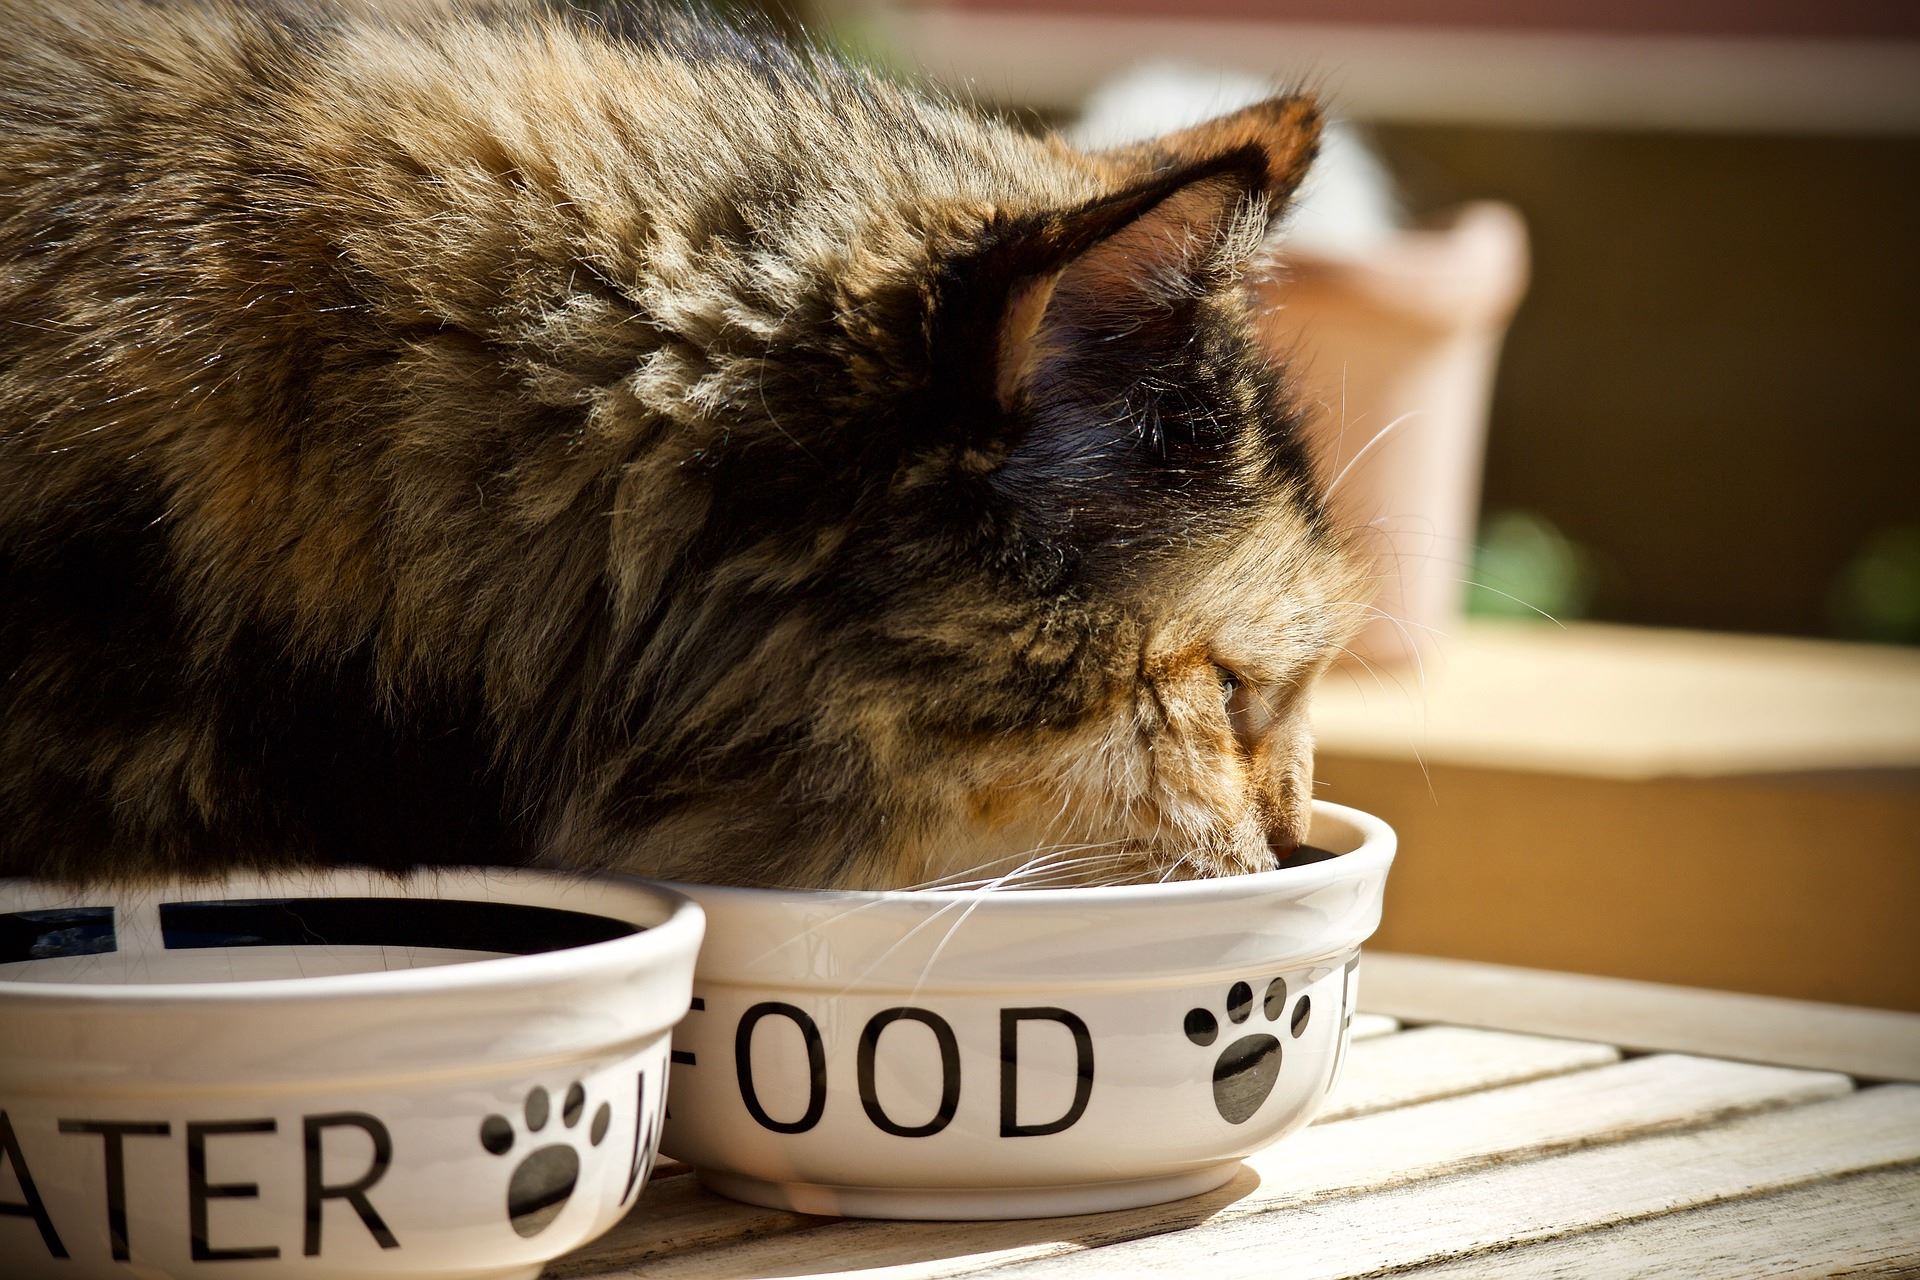 fluffy cat eating out of a bowl marked "food"